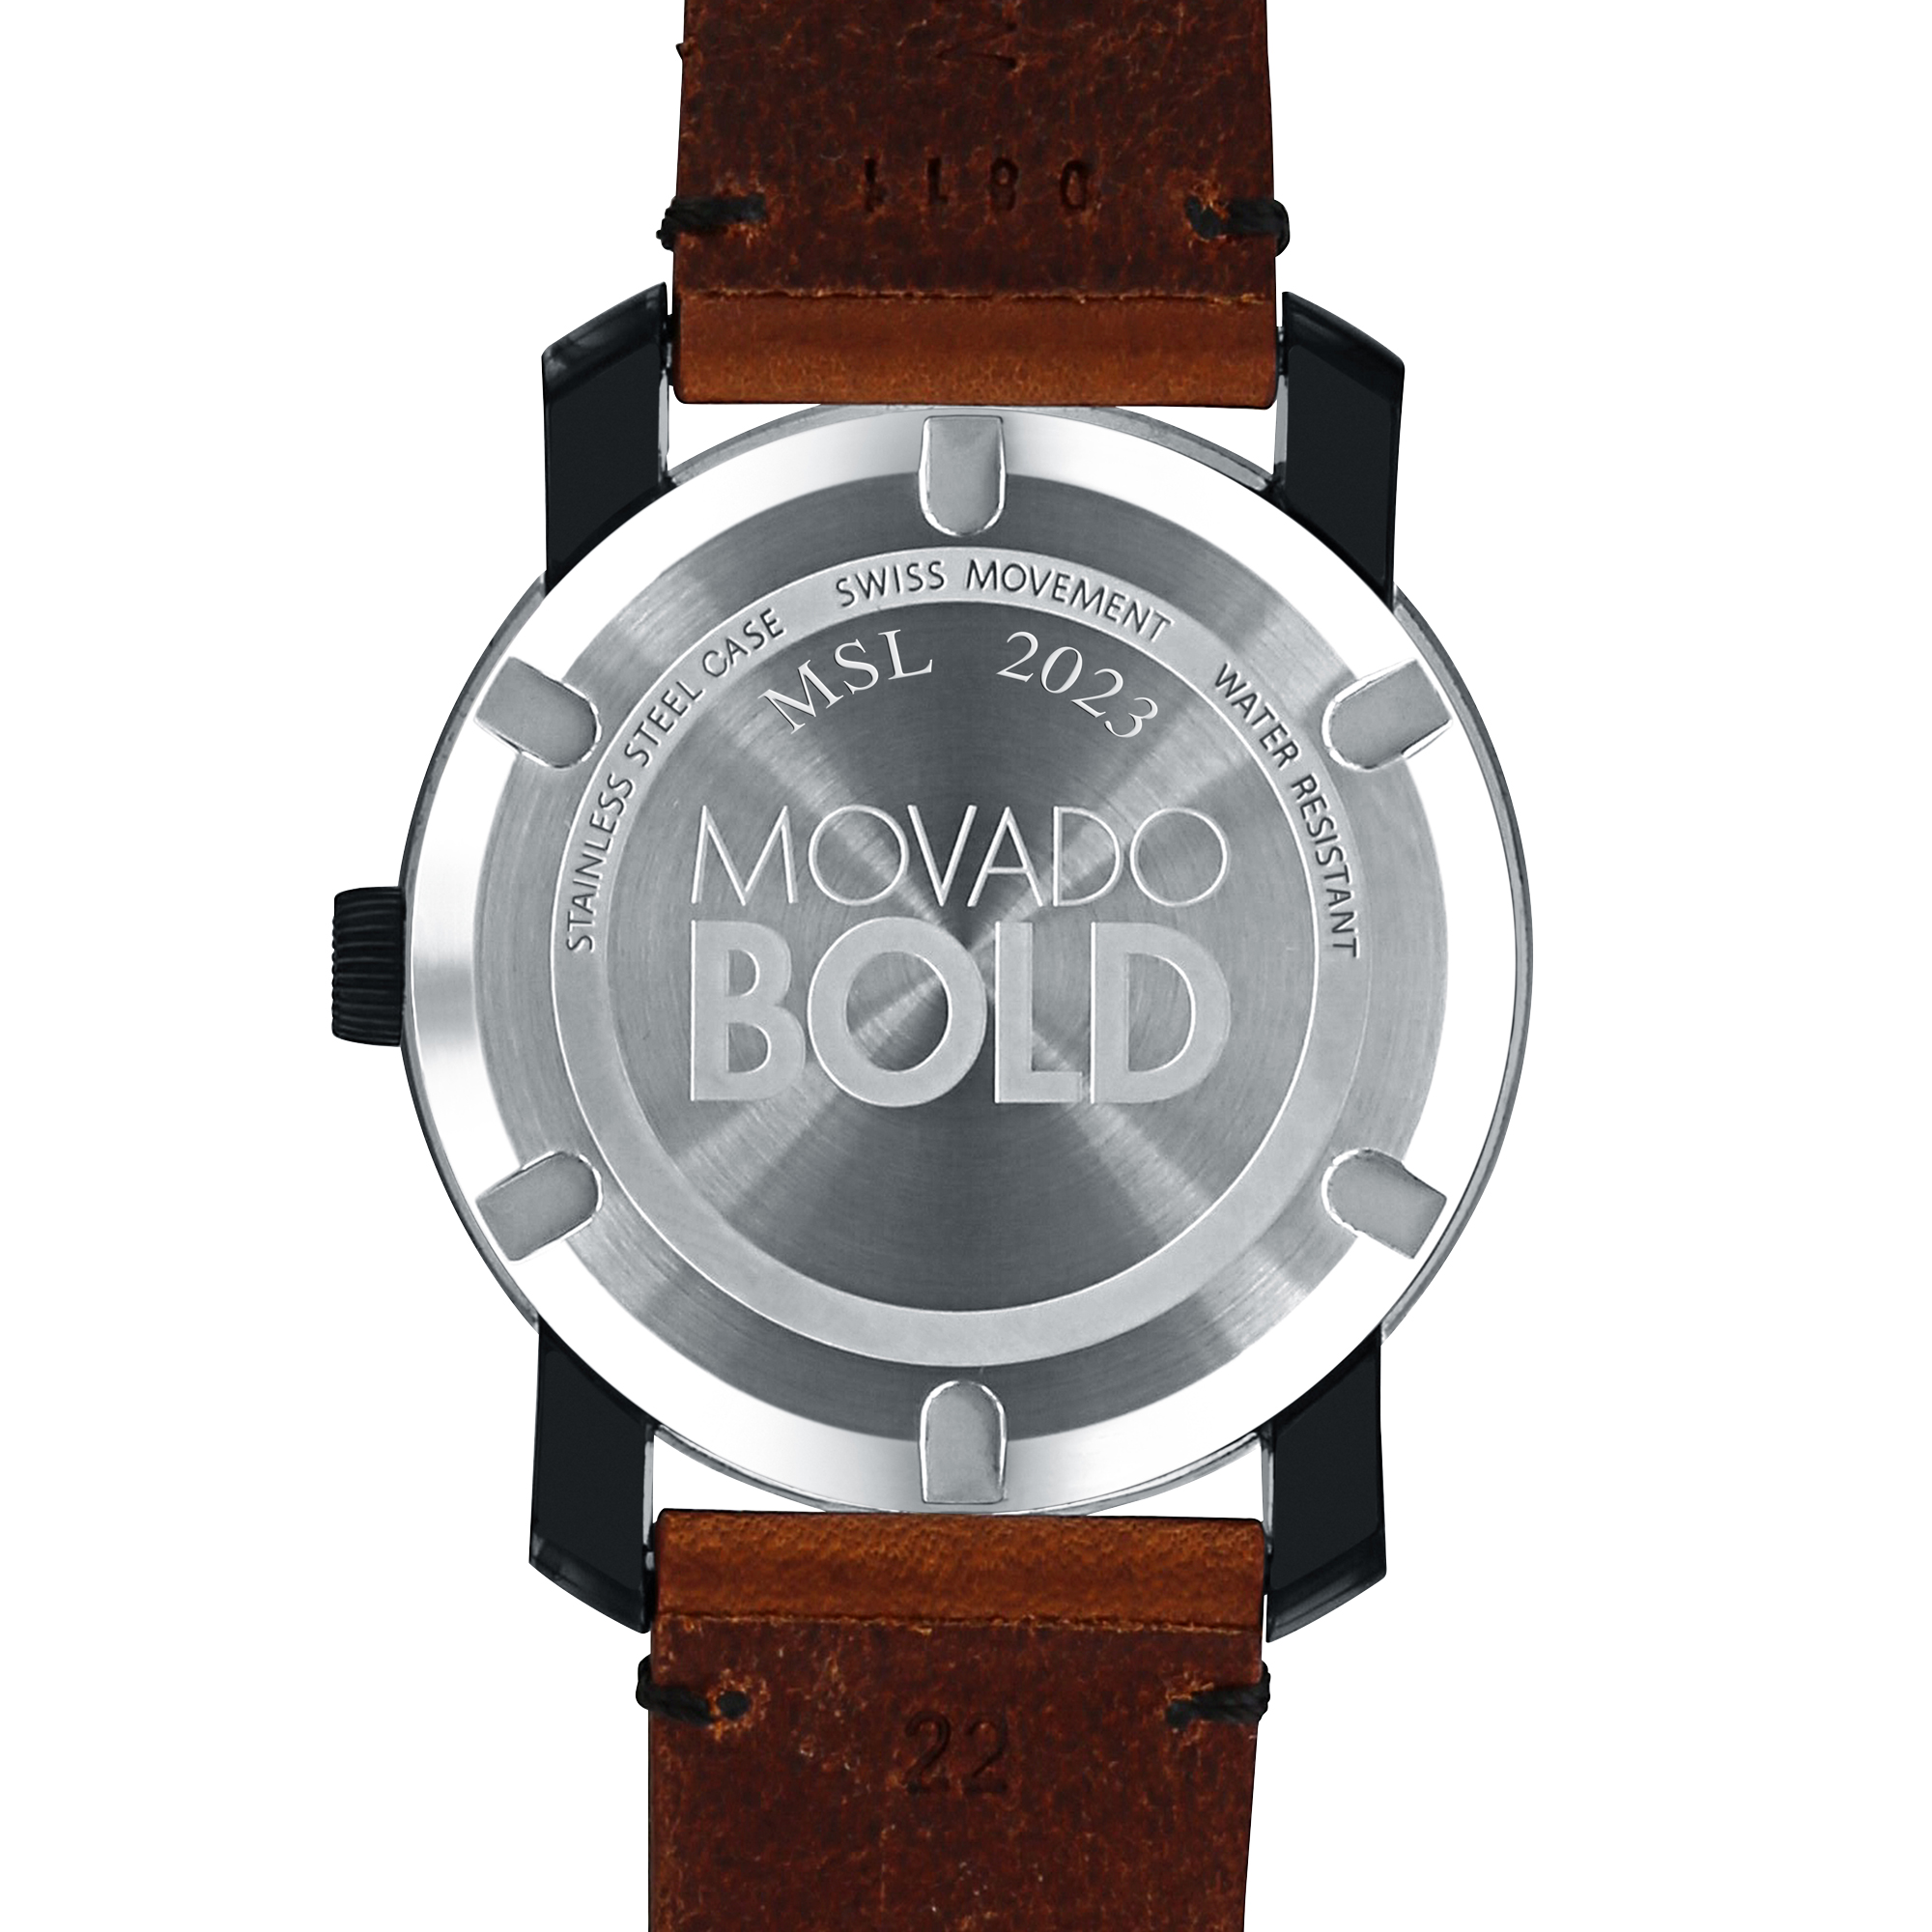 University of Kentucky Men's Movado BOLD with Brown Leather Strap - Image 3